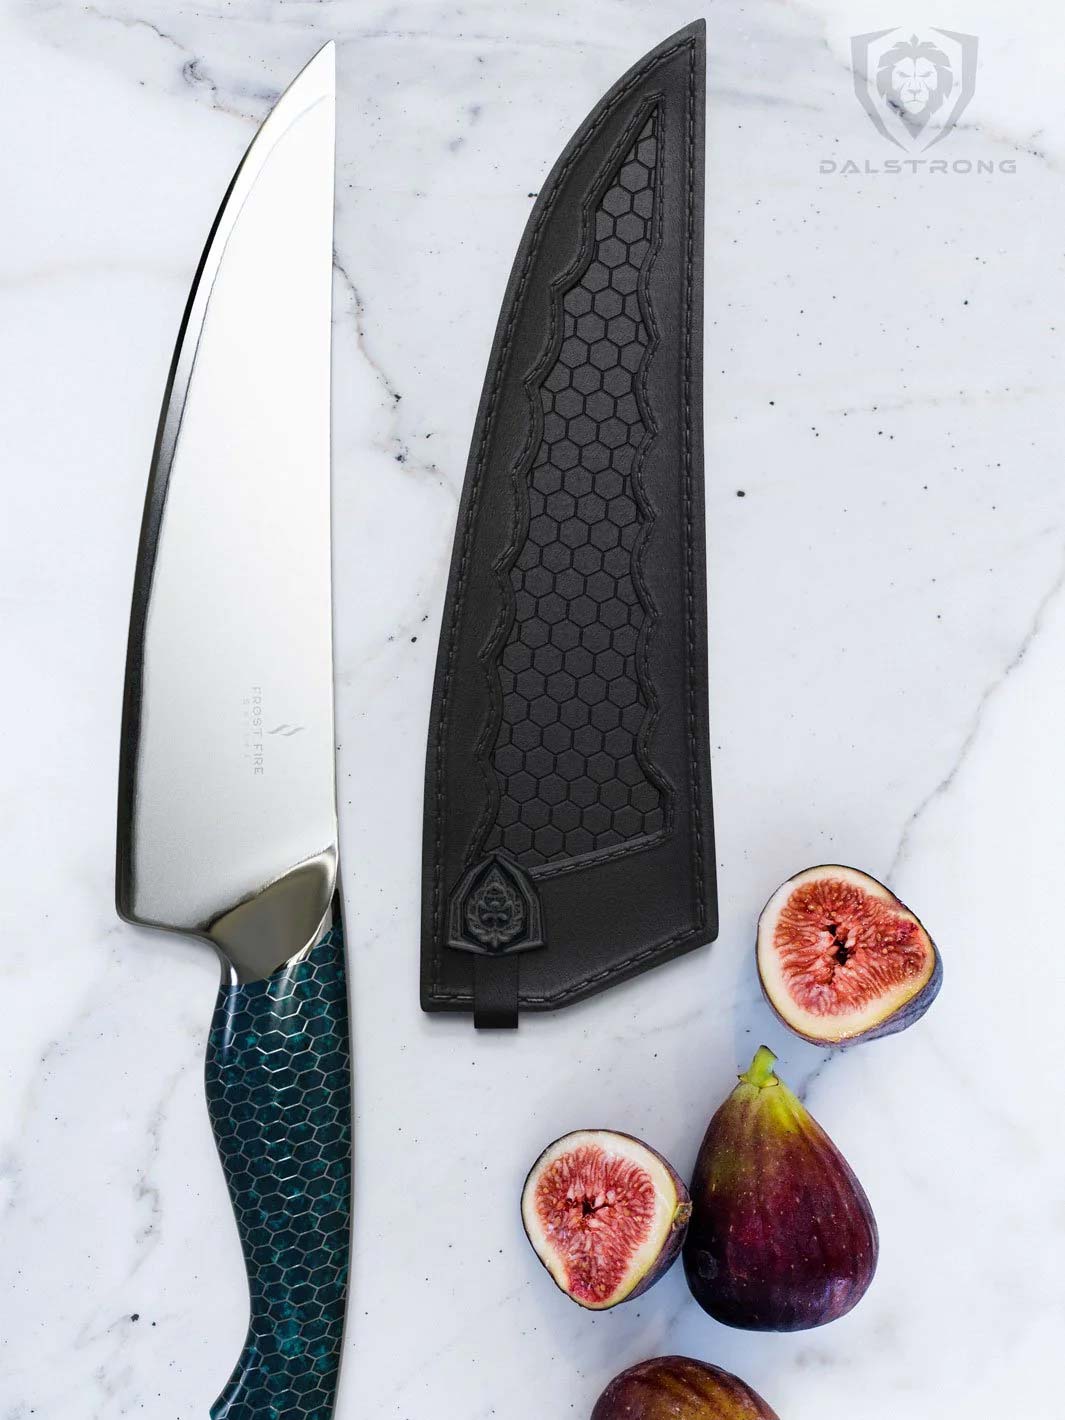 Dalstrong frost fire series 8 inch chef knife with blue honeycomb handle beside it's black sheath.